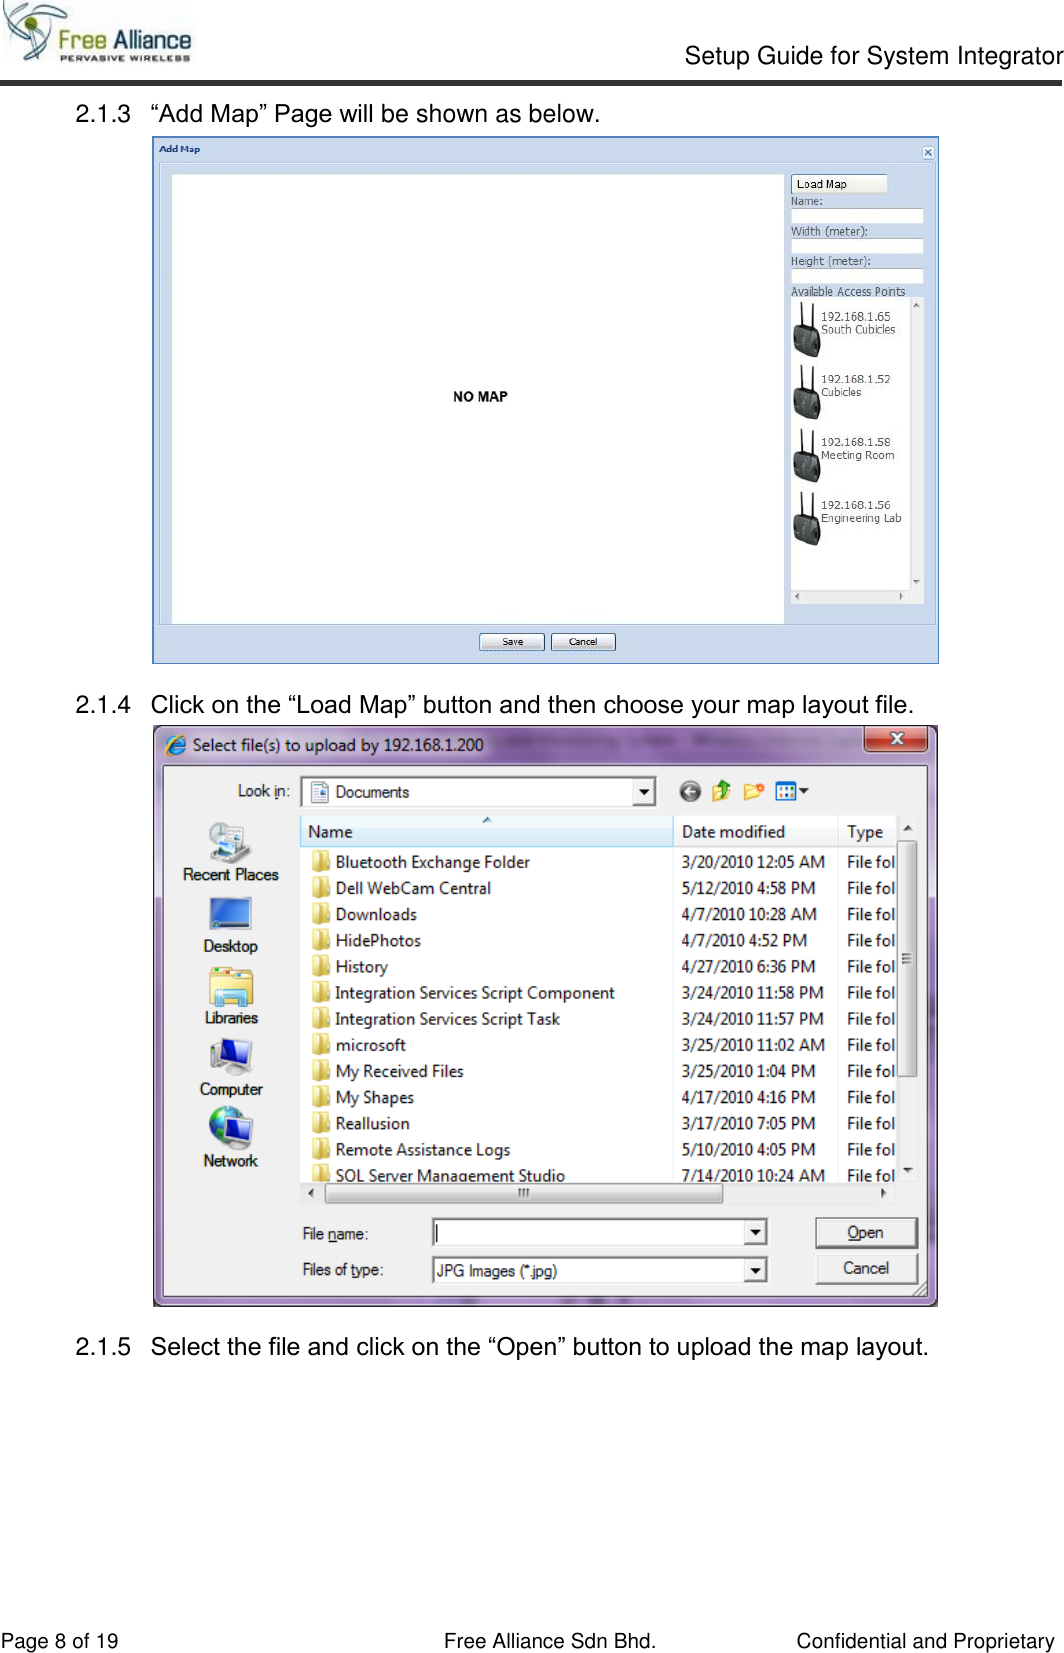     Setup Guide for System Integrator                                                                                                   Page 8 of 19 Free Alliance Sdn Bhd.             Confidential and Proprietary 2.1.3  “Add Map” Page will be shown as below.  2.1.4  Click on the “Load Map” button and then choose your map layout file.   2.1.5  Select the file and click on the “Open” button to upload the map layout.  